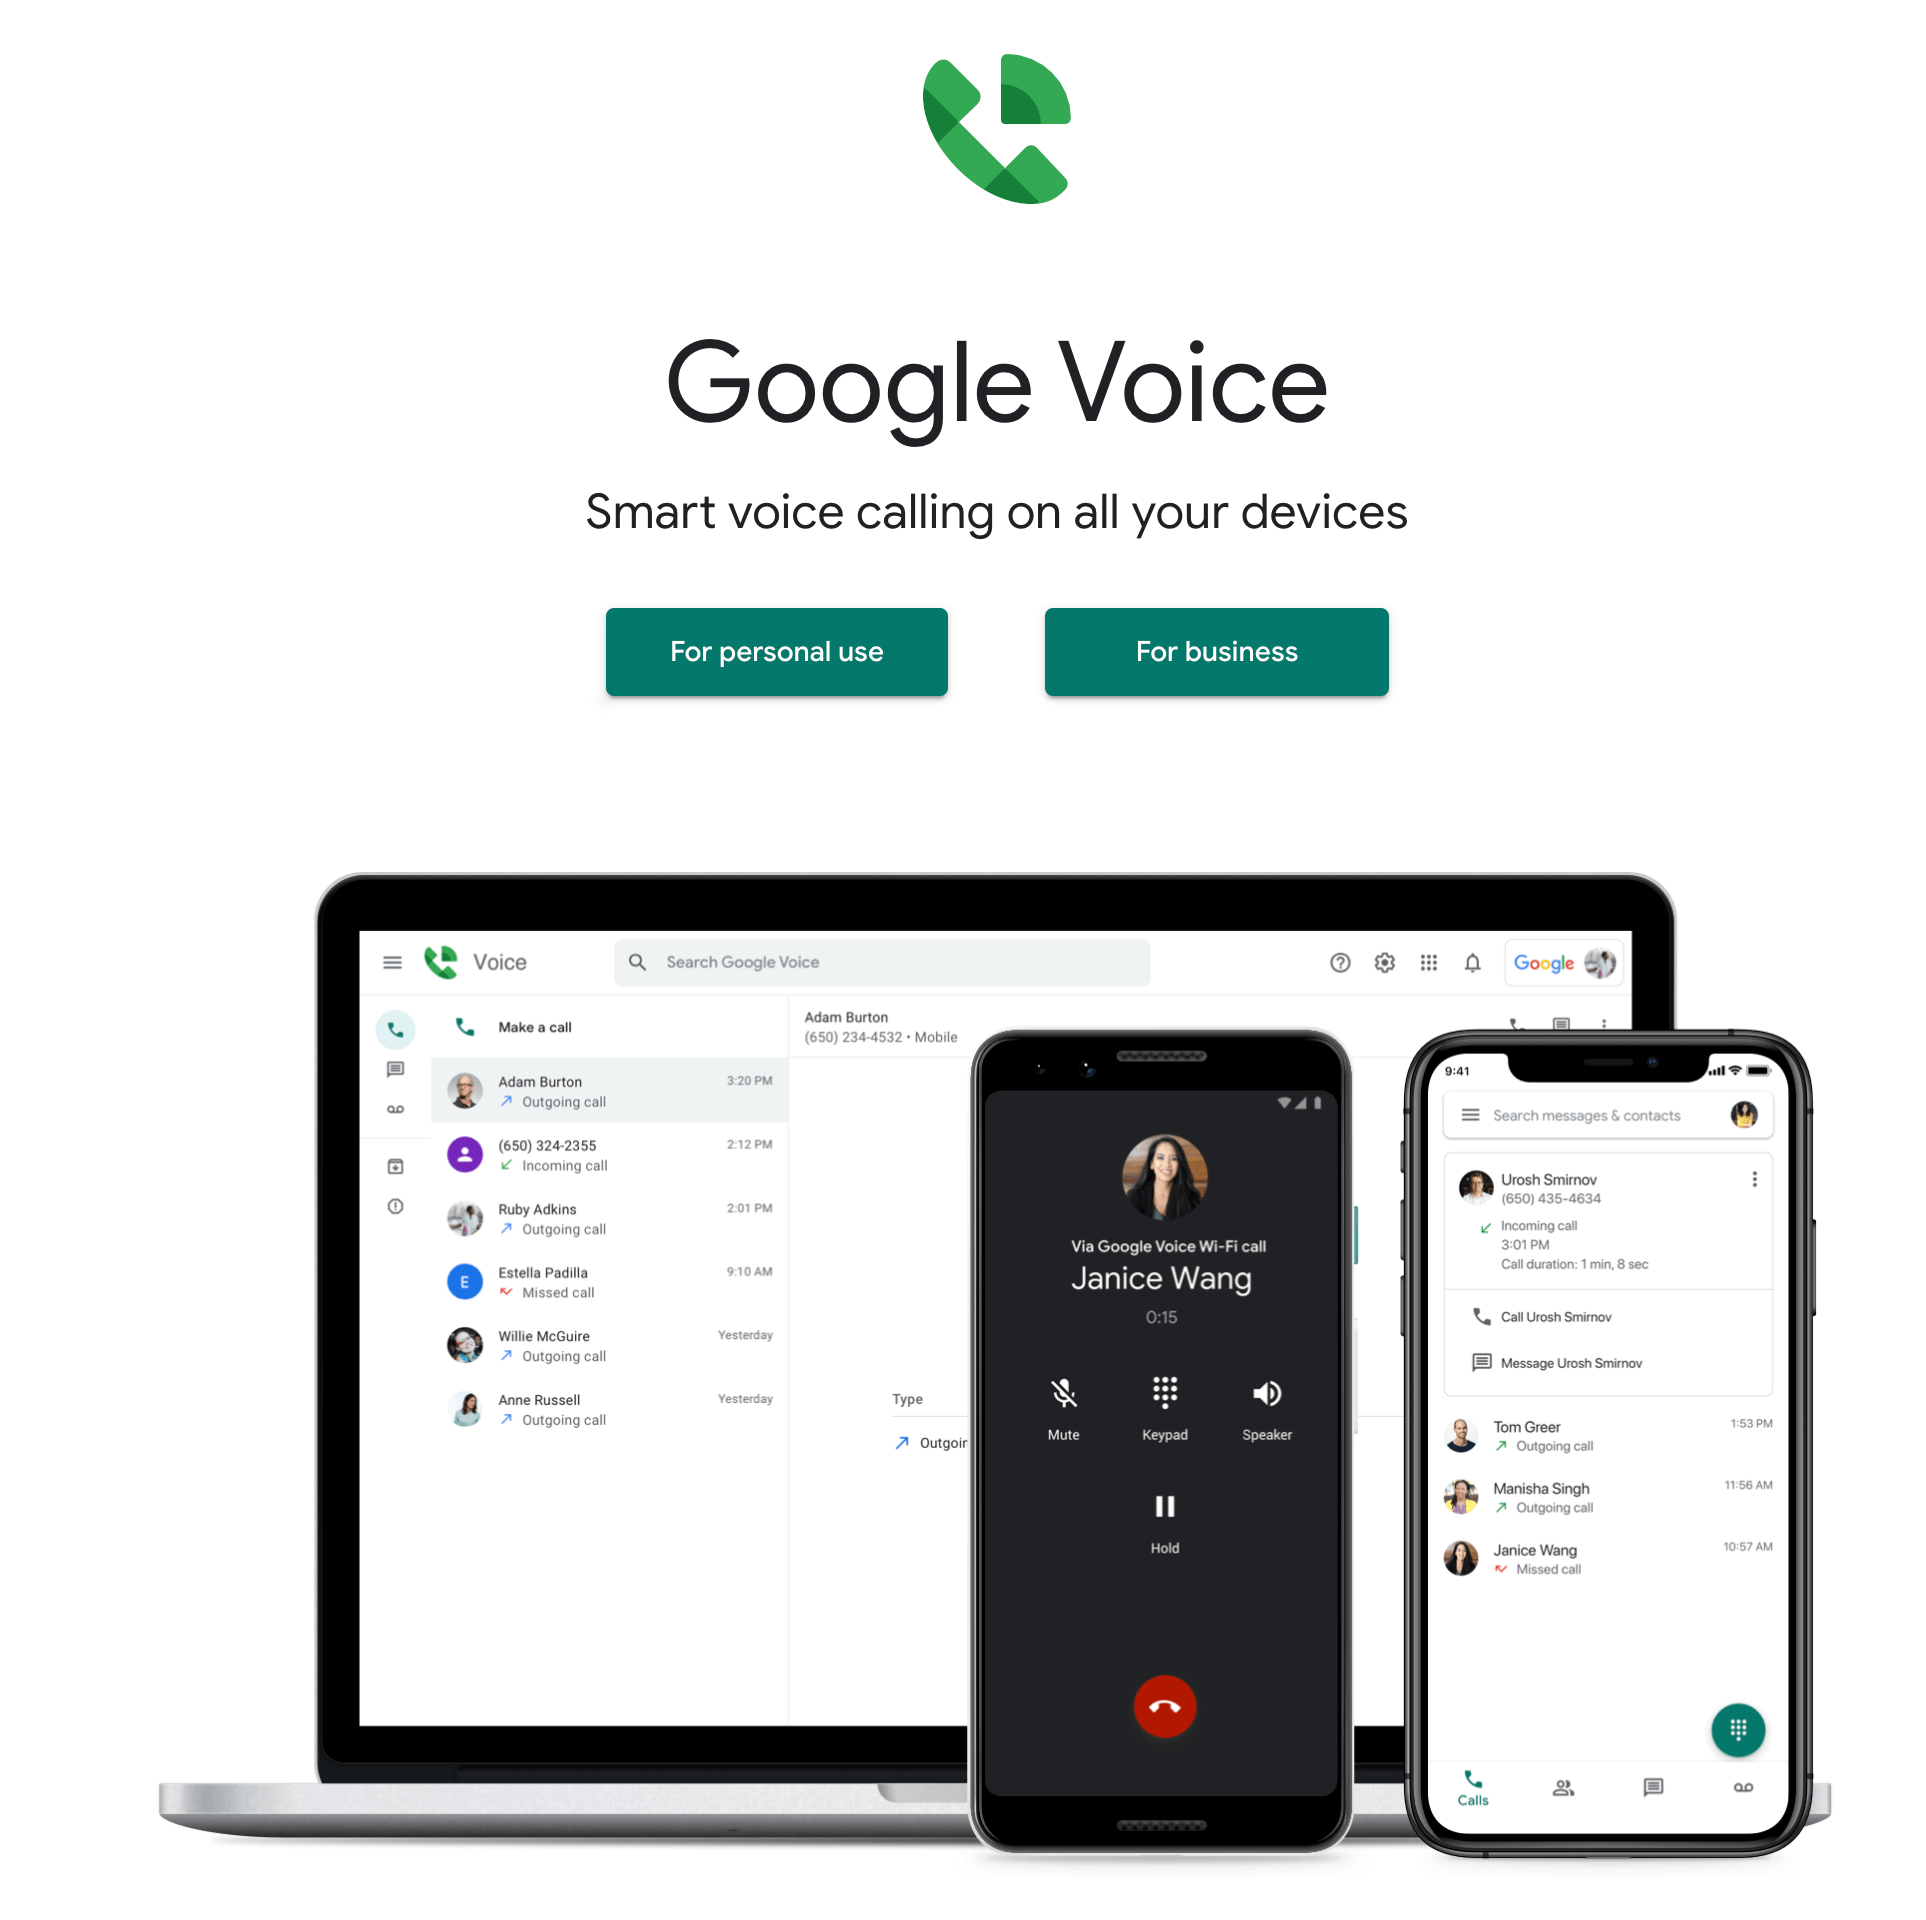 The Google Voice home page